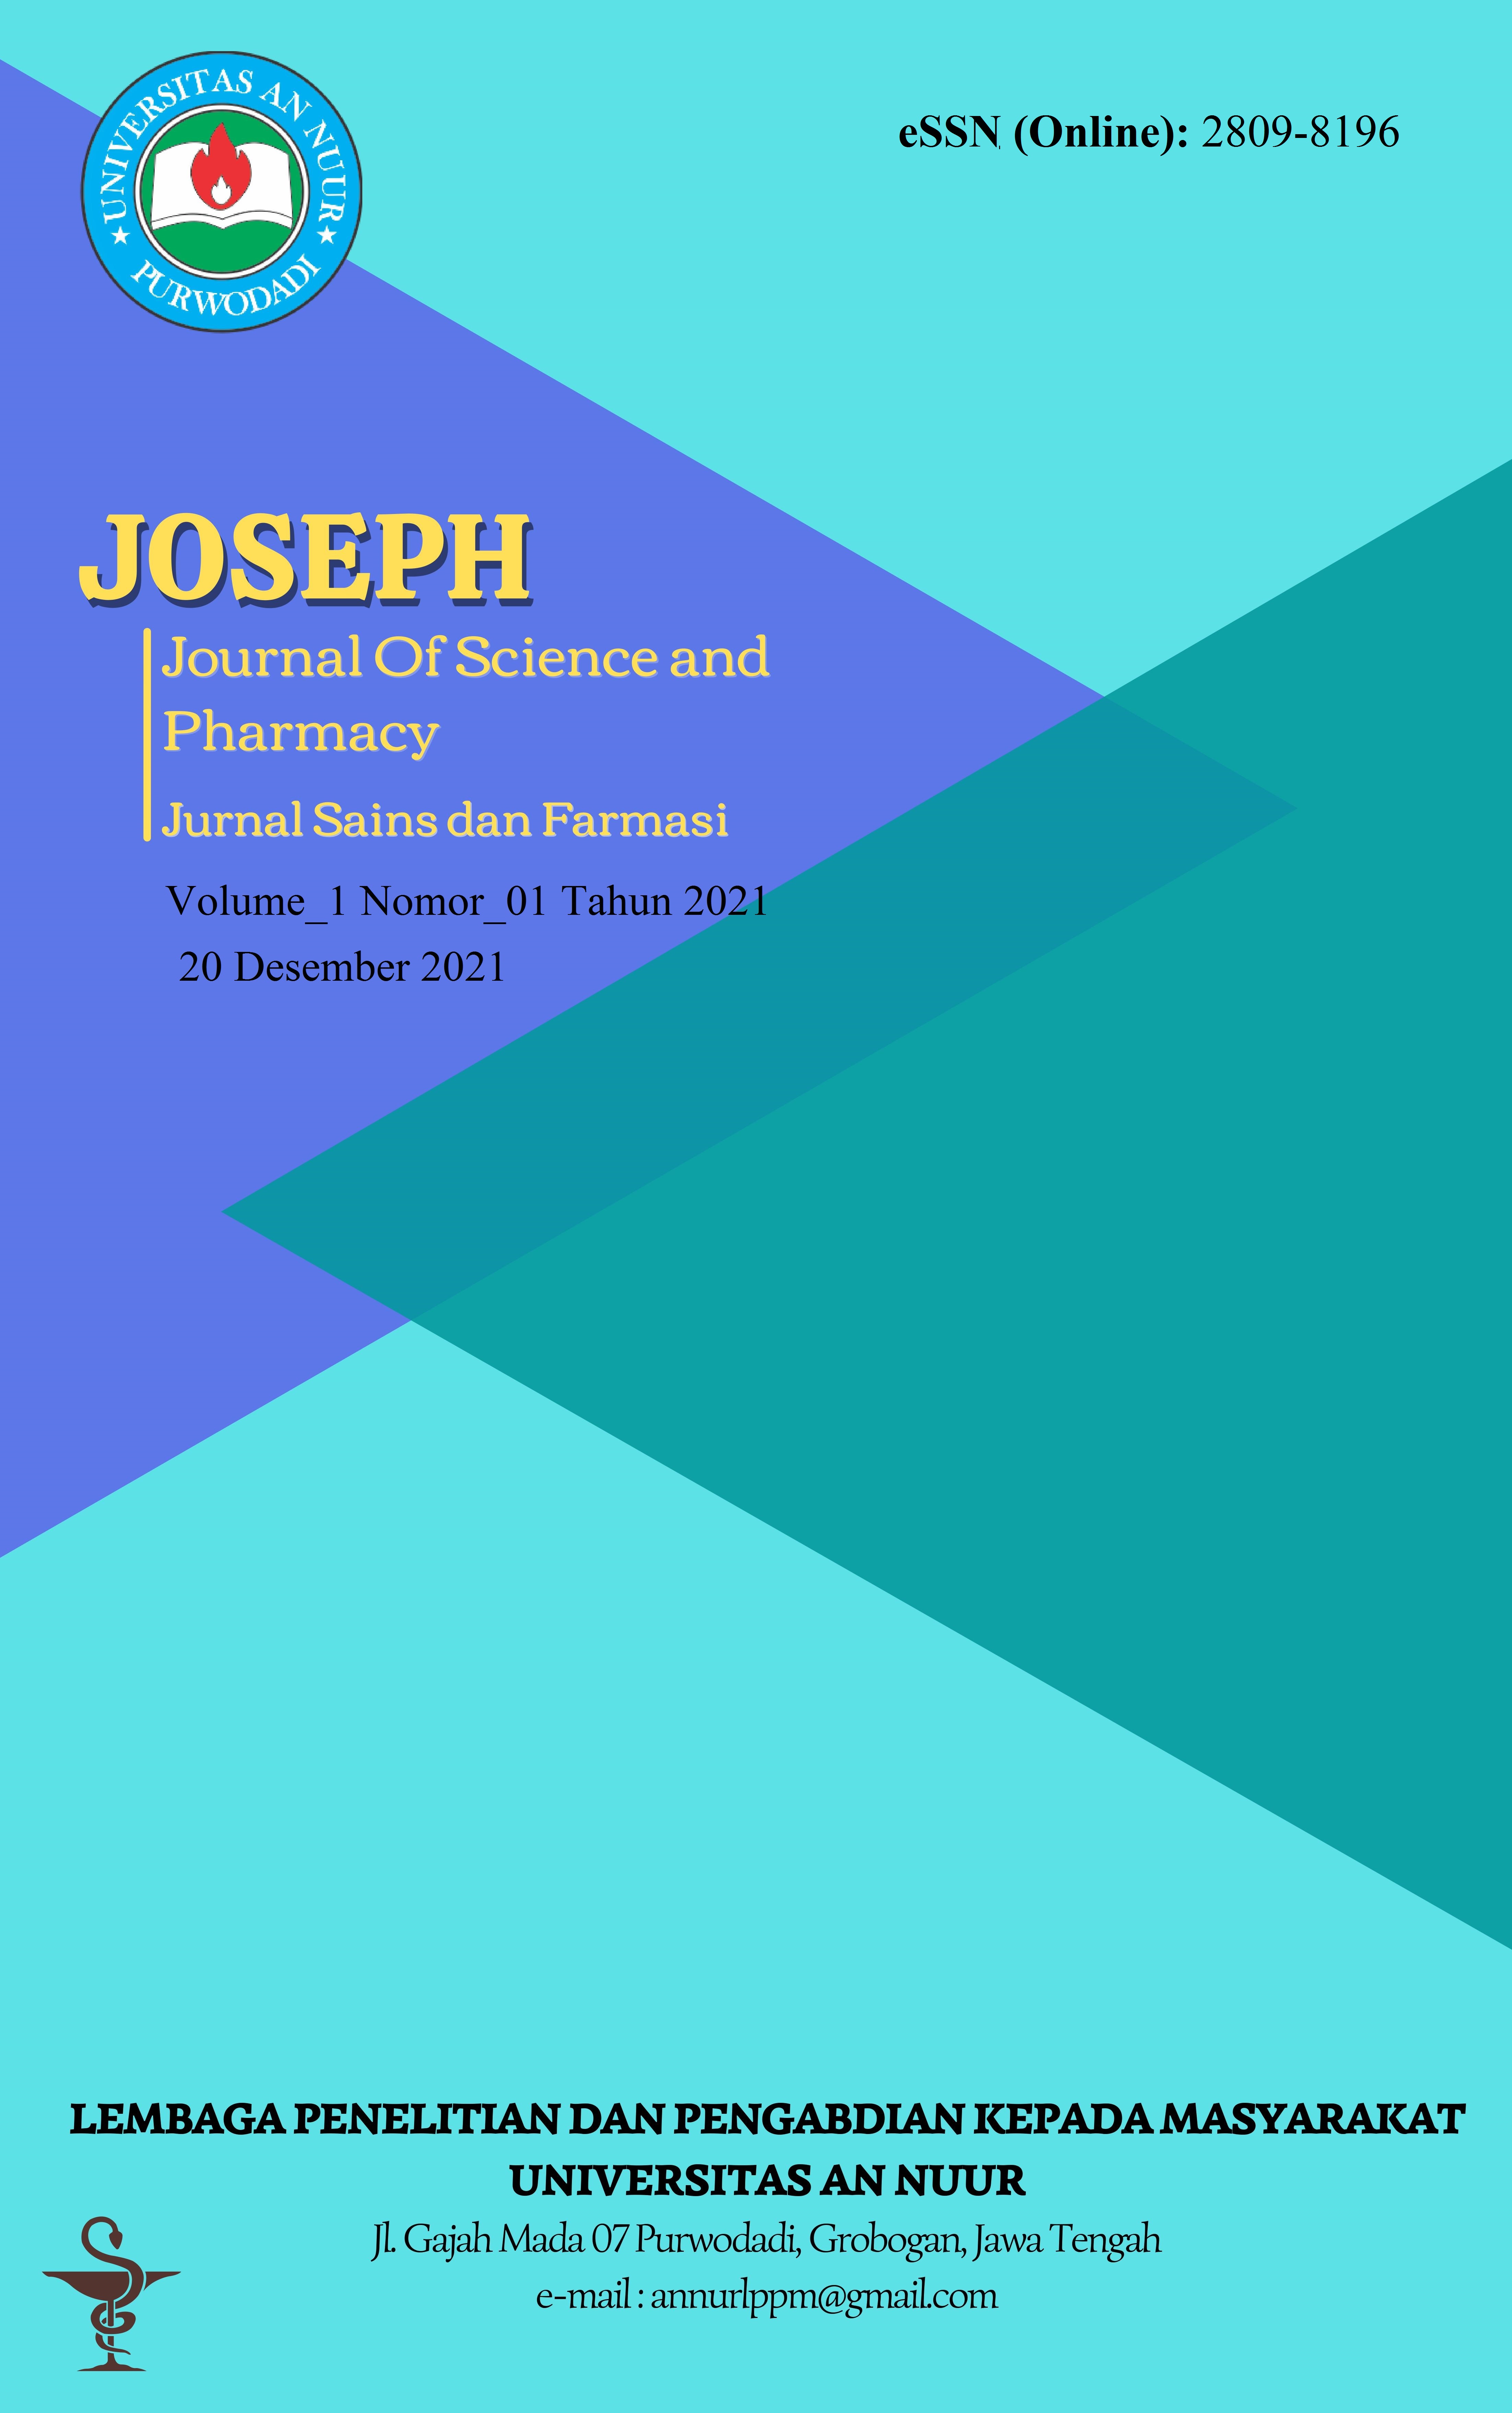 					View Vol. 1 No. 01 (2021): Journal of Science and Pharmacy (Joseph)
				